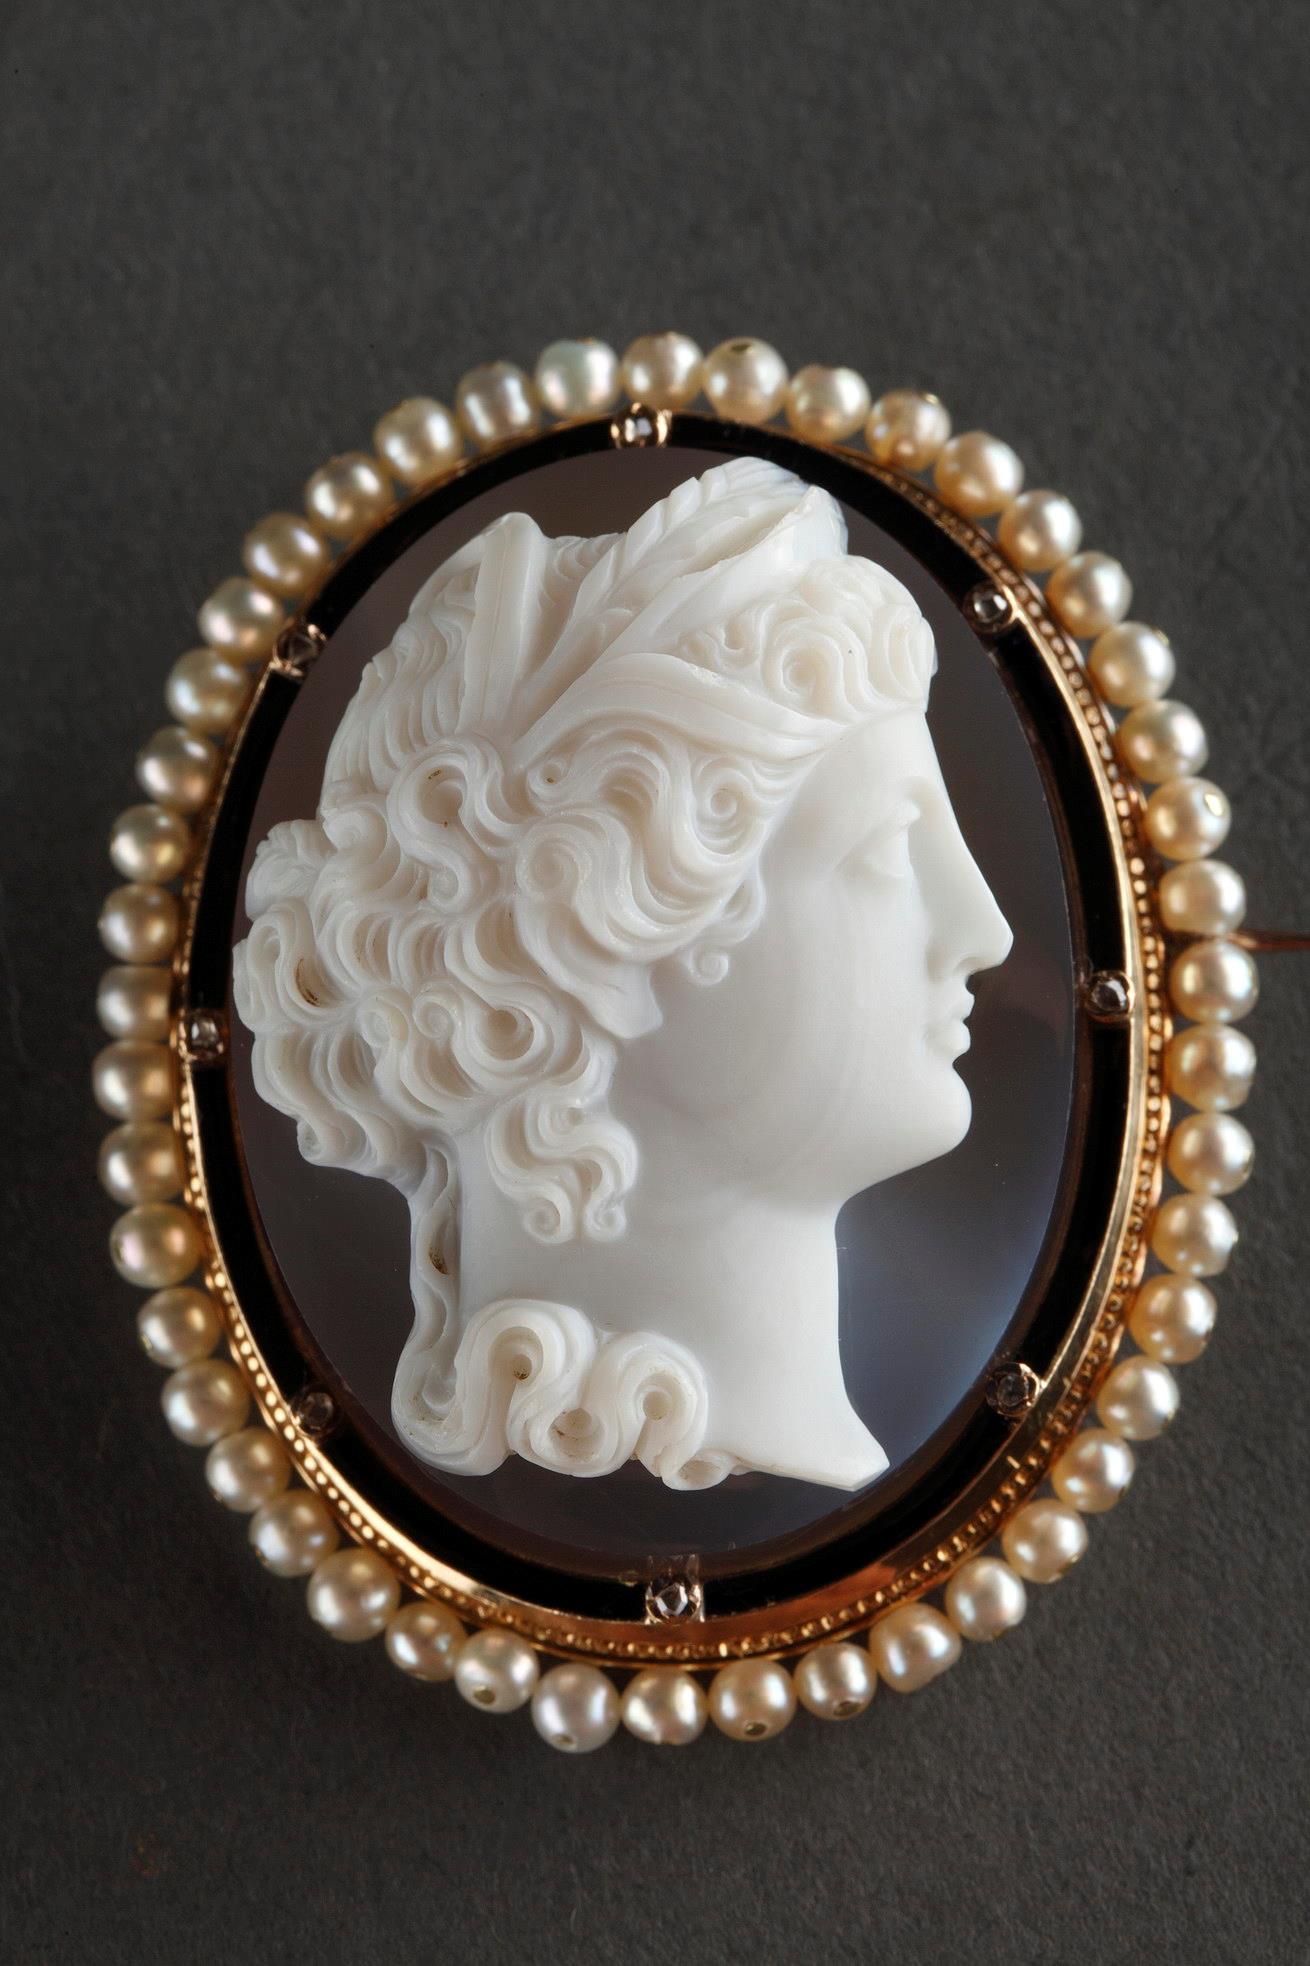 Gold-Mounted Agate Cameo Brooch.<br>
Second part of the 19th century. Napoleon III. 